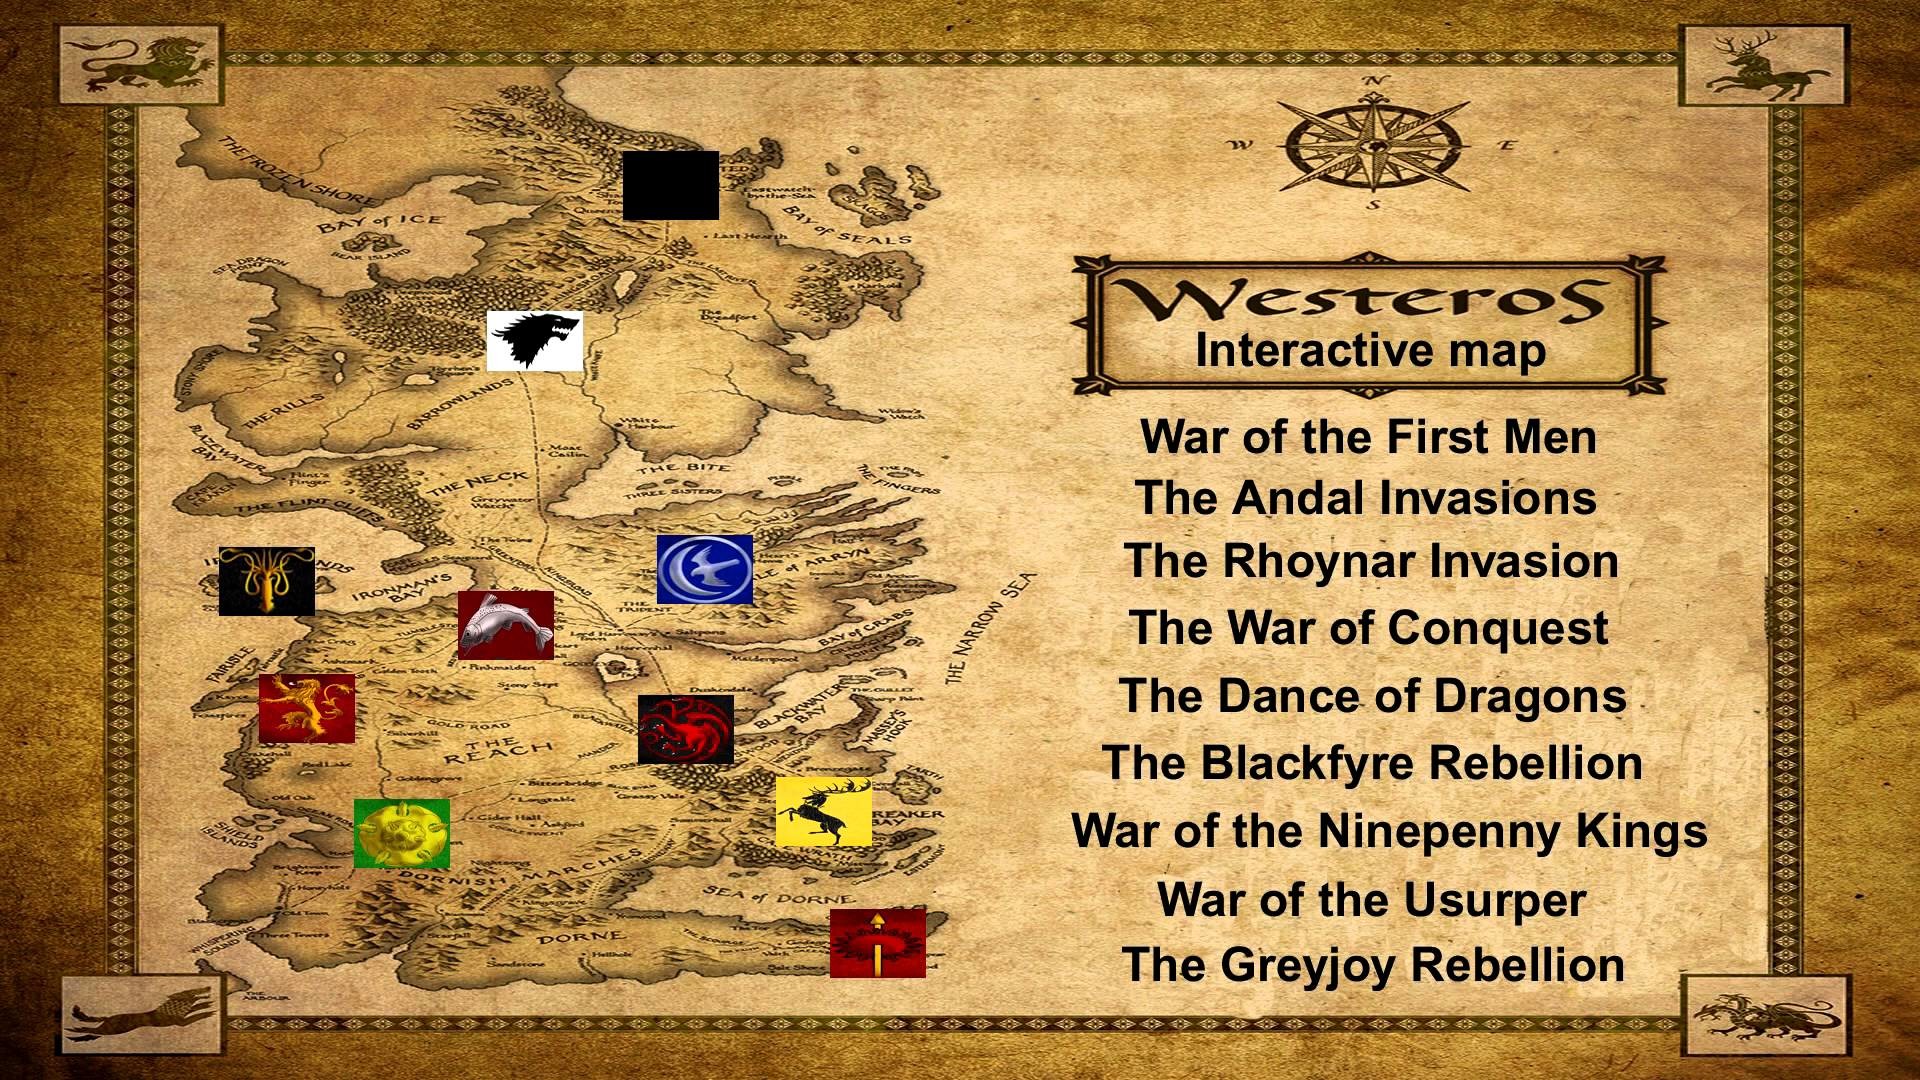 1920x1080 Westeros Lore: Interactive Map